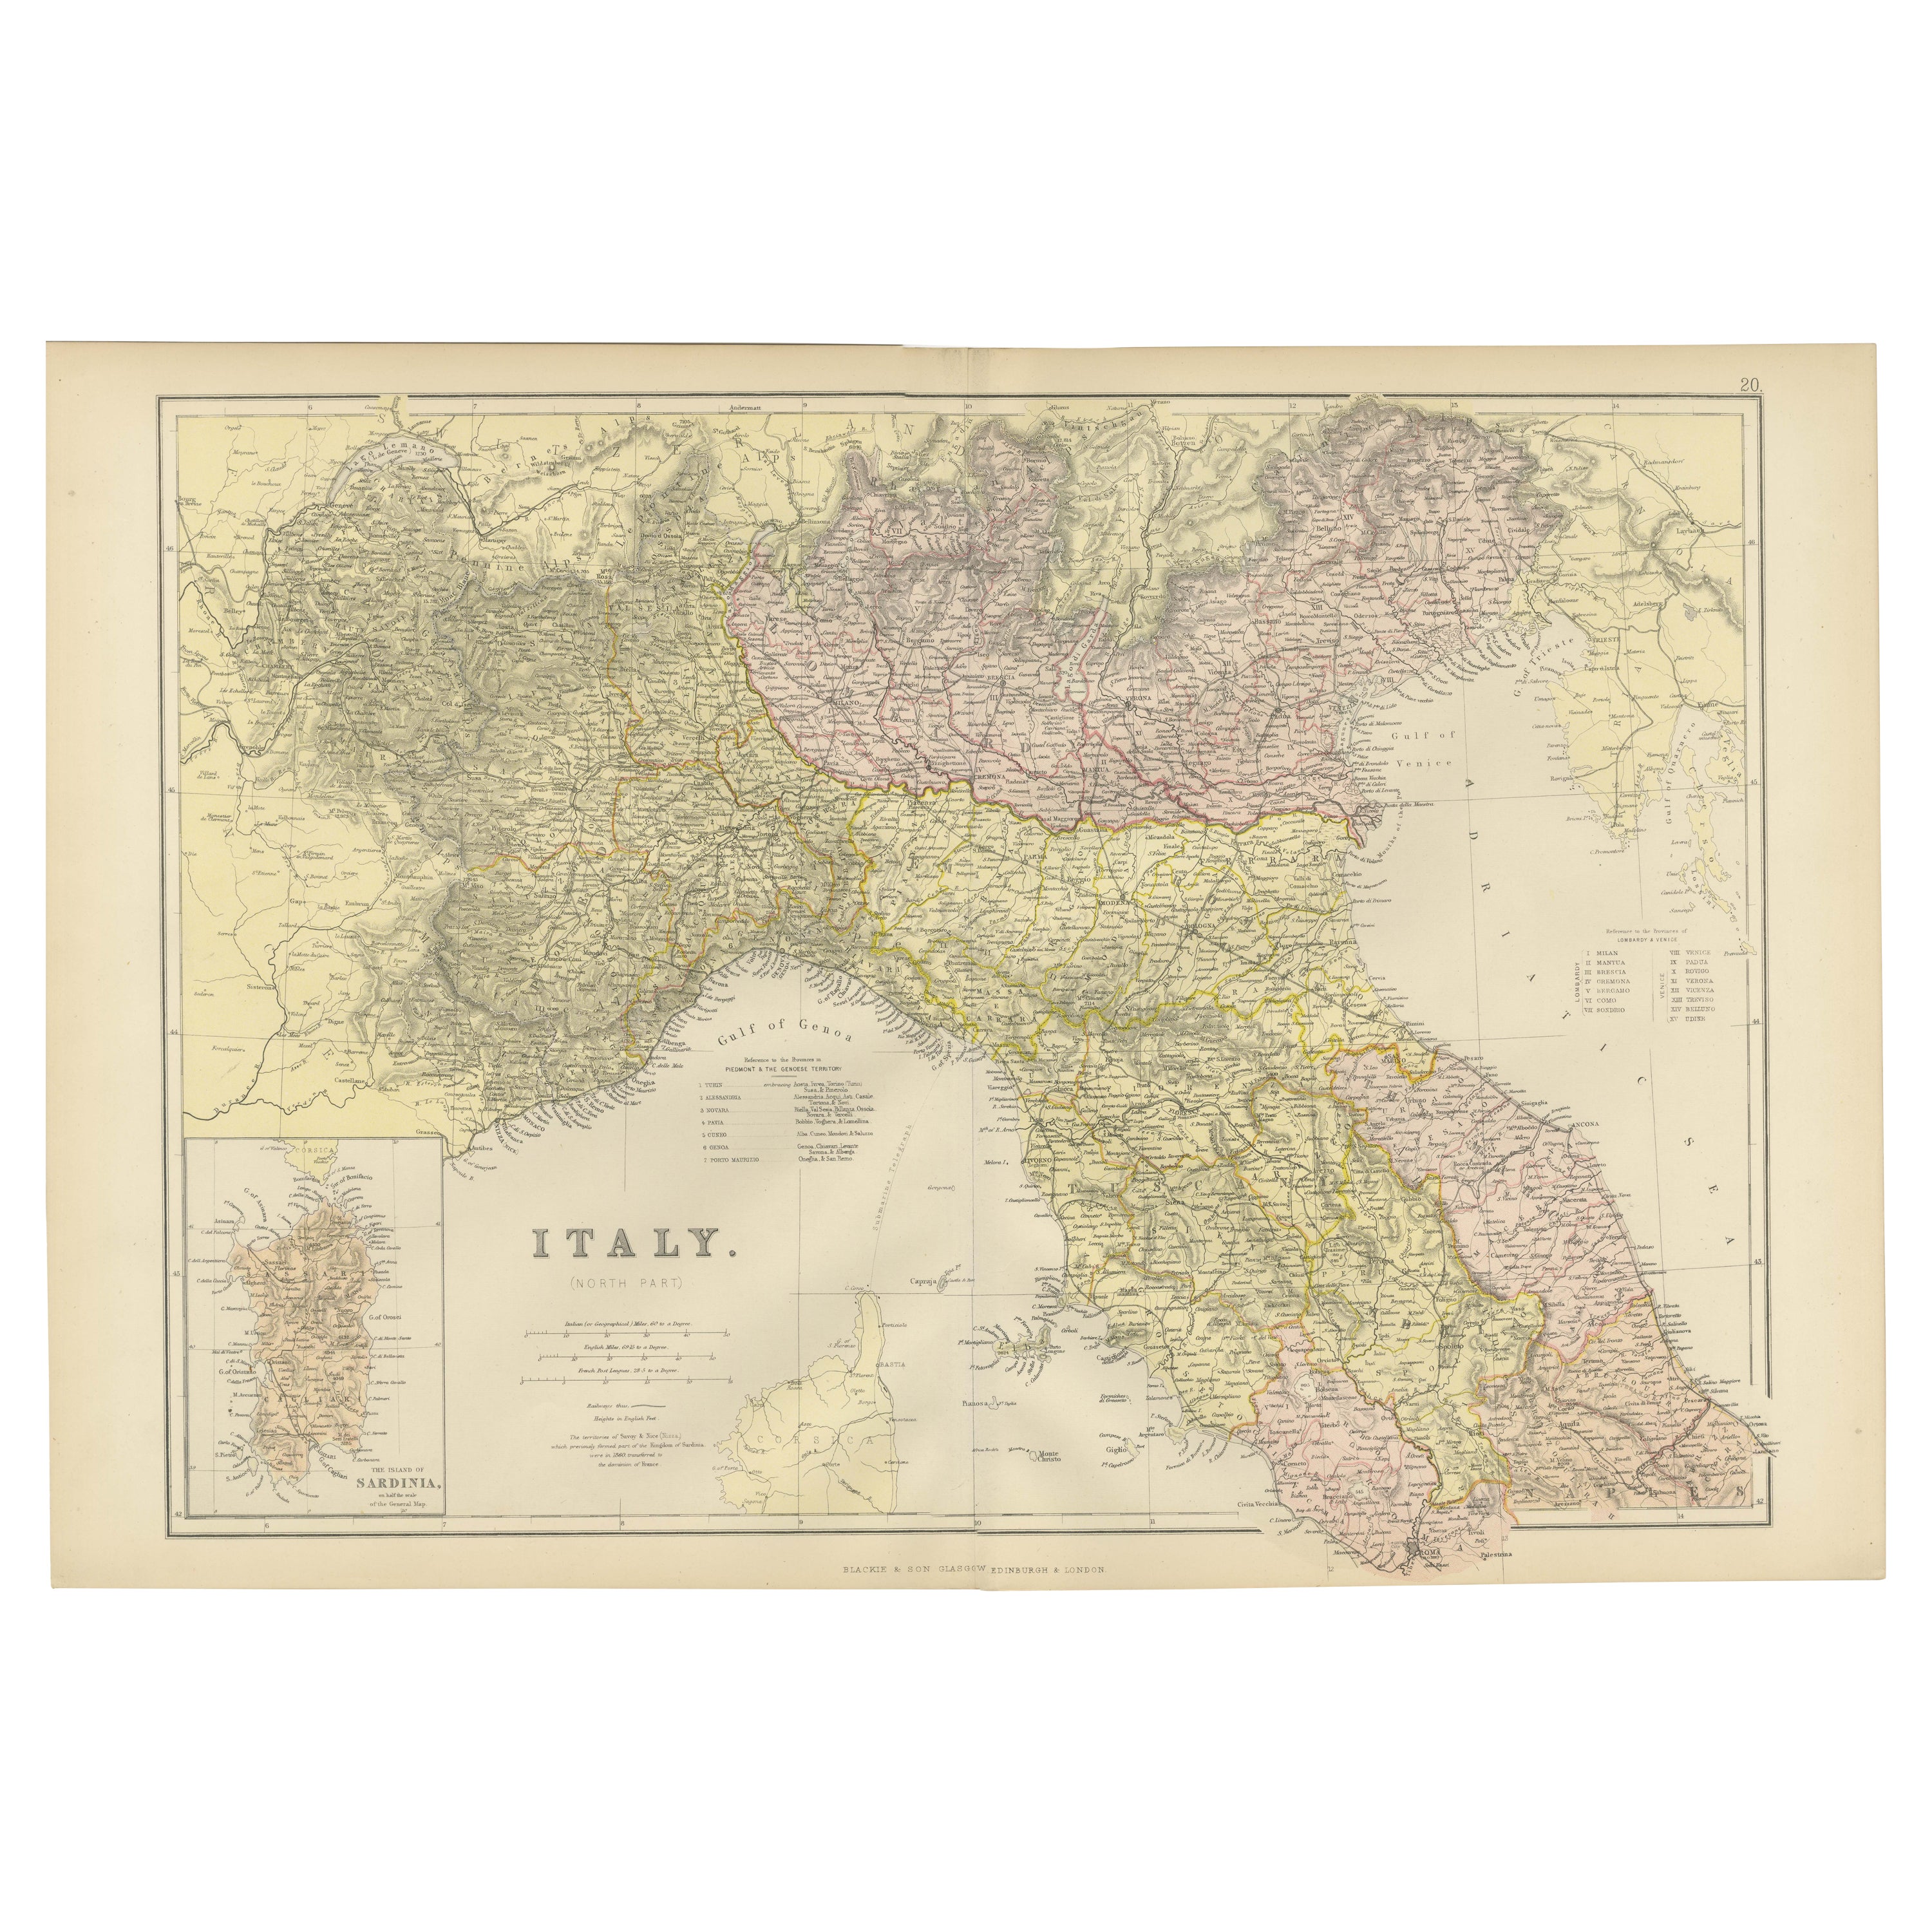 Original Antique Map of Italy with an Inset of Sardinia, 1882